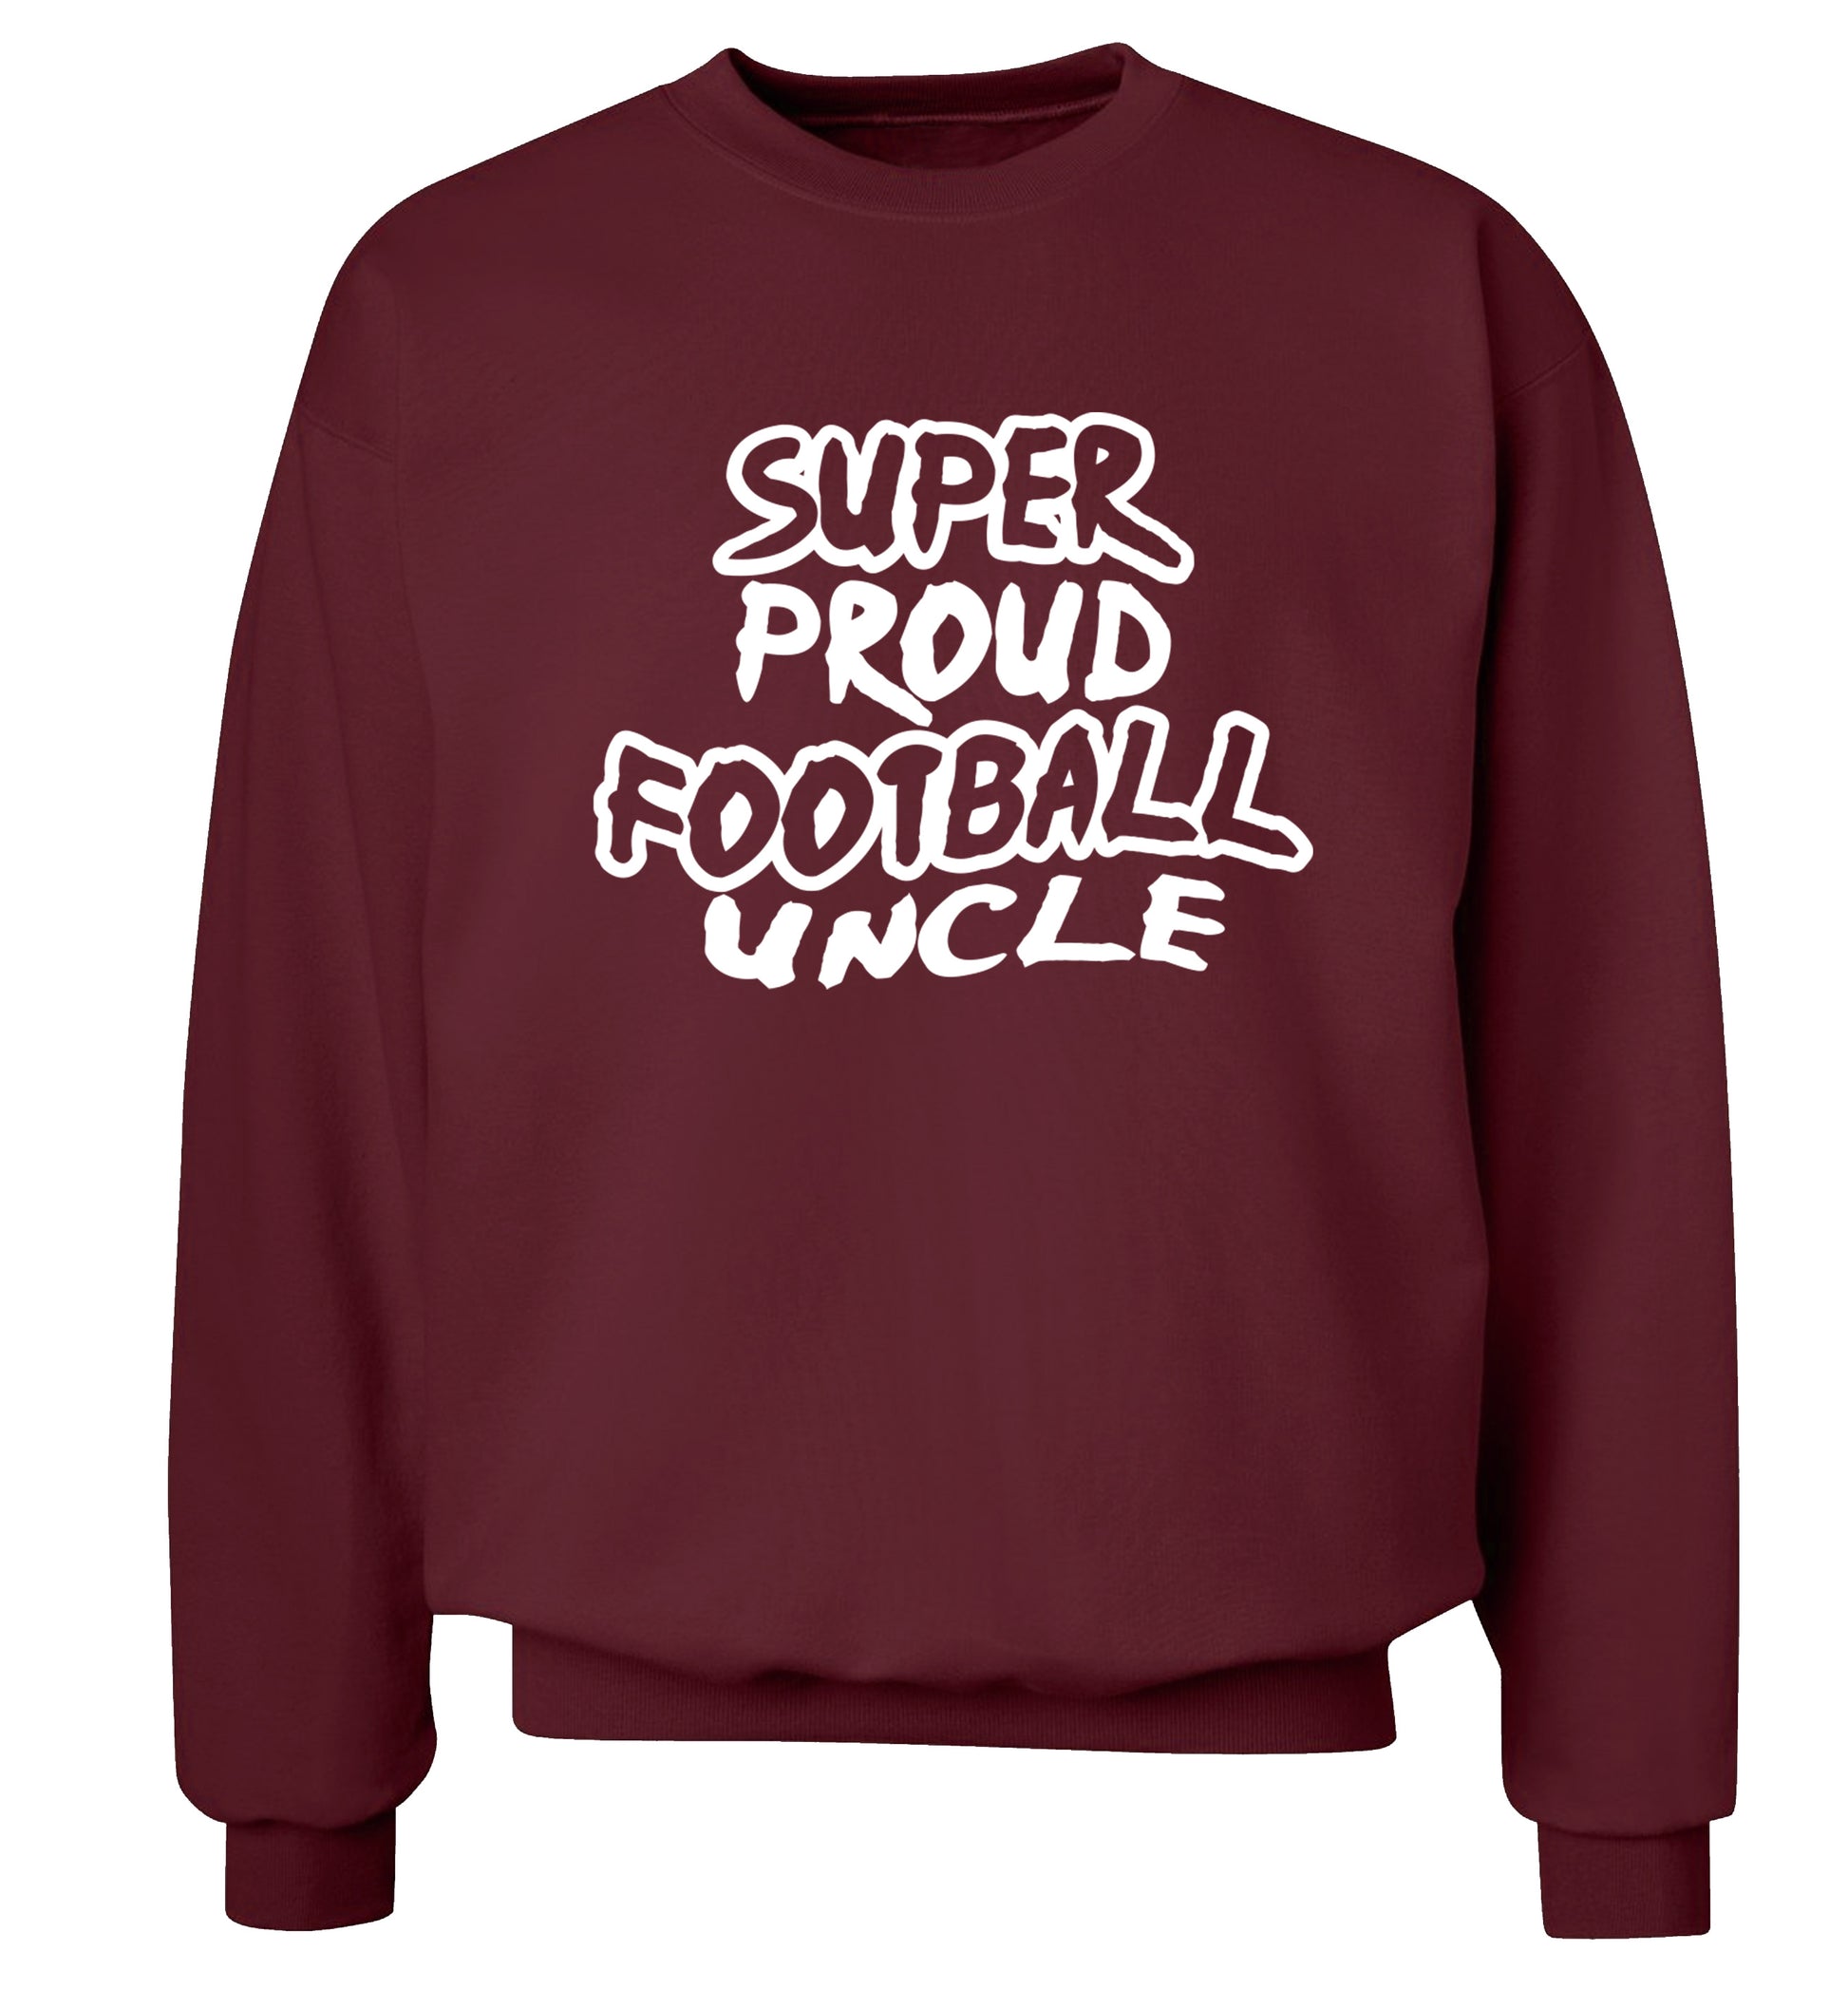 Super proud football uncle Adult's unisexmaroon Sweater 2XL